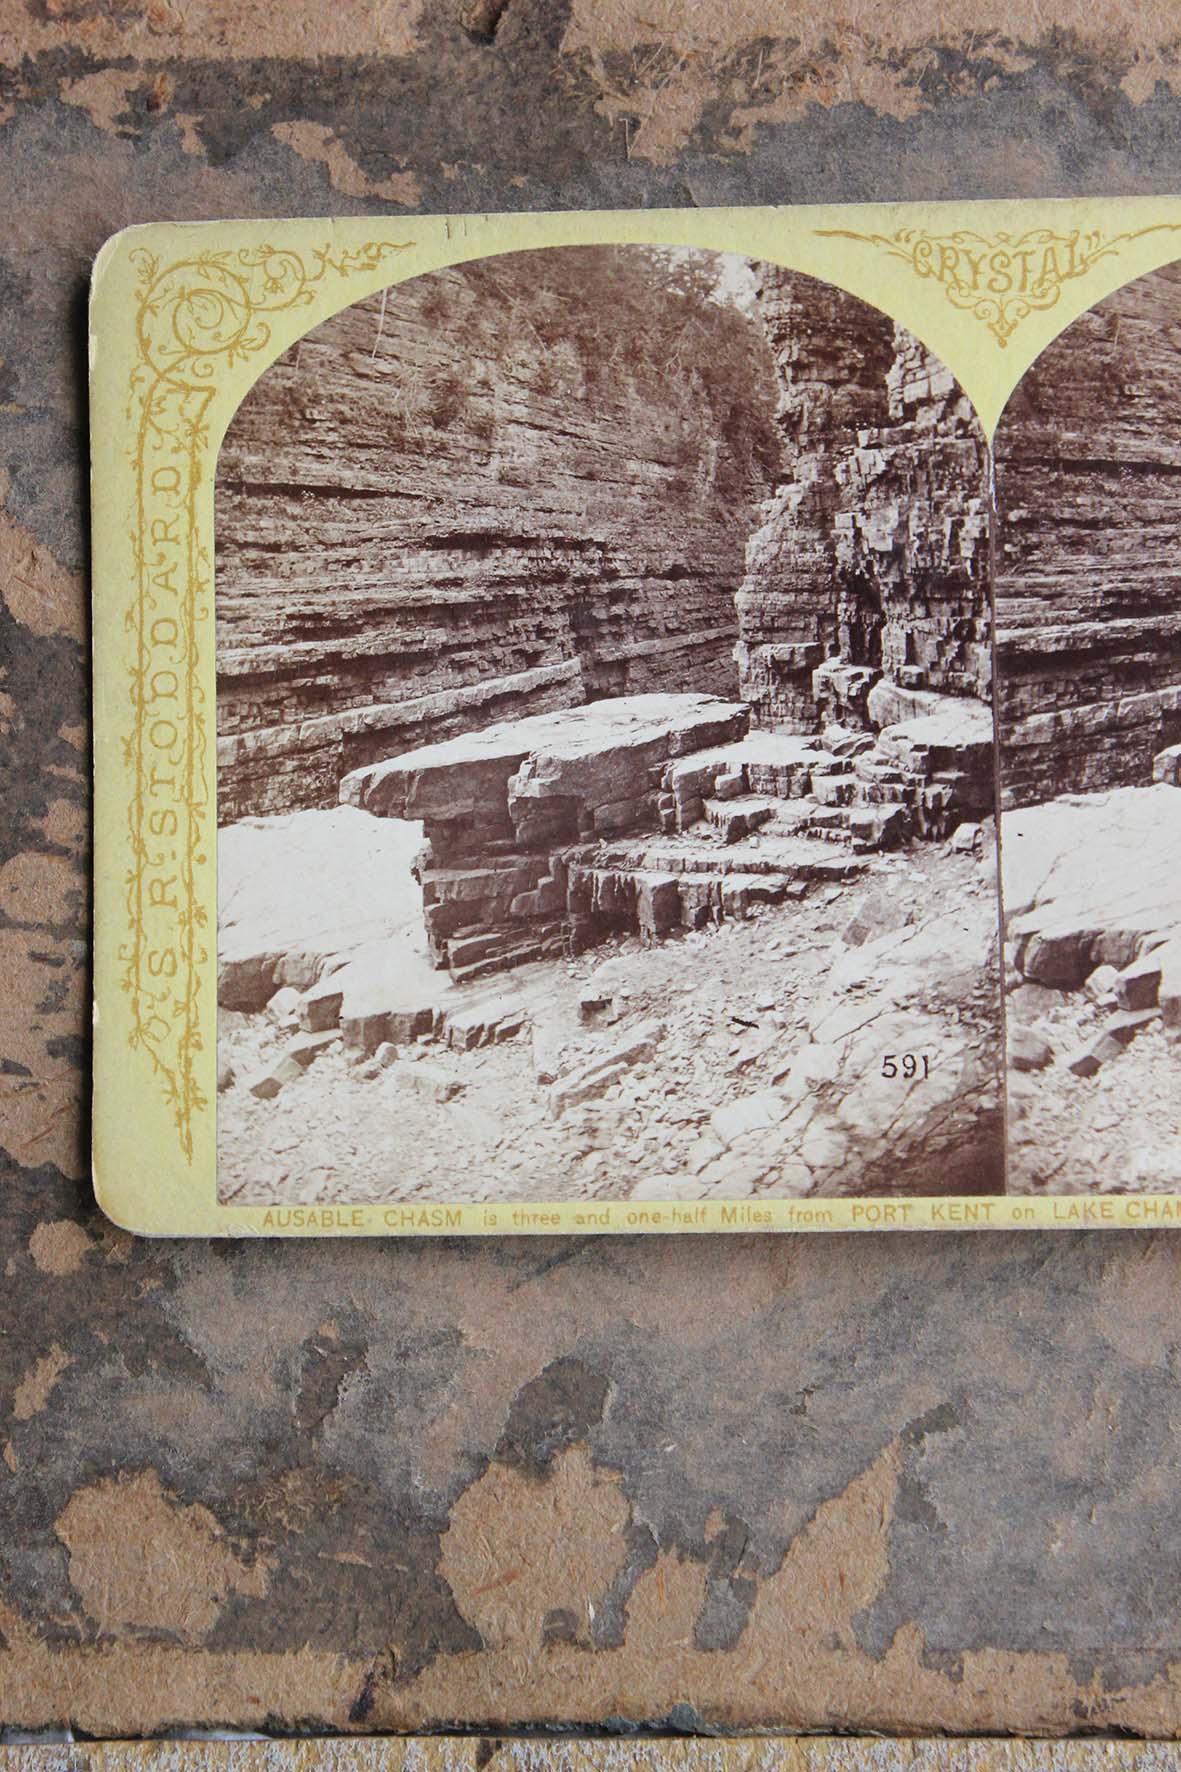 Late 1800's Stereoscopy Card - Ausable Chasm